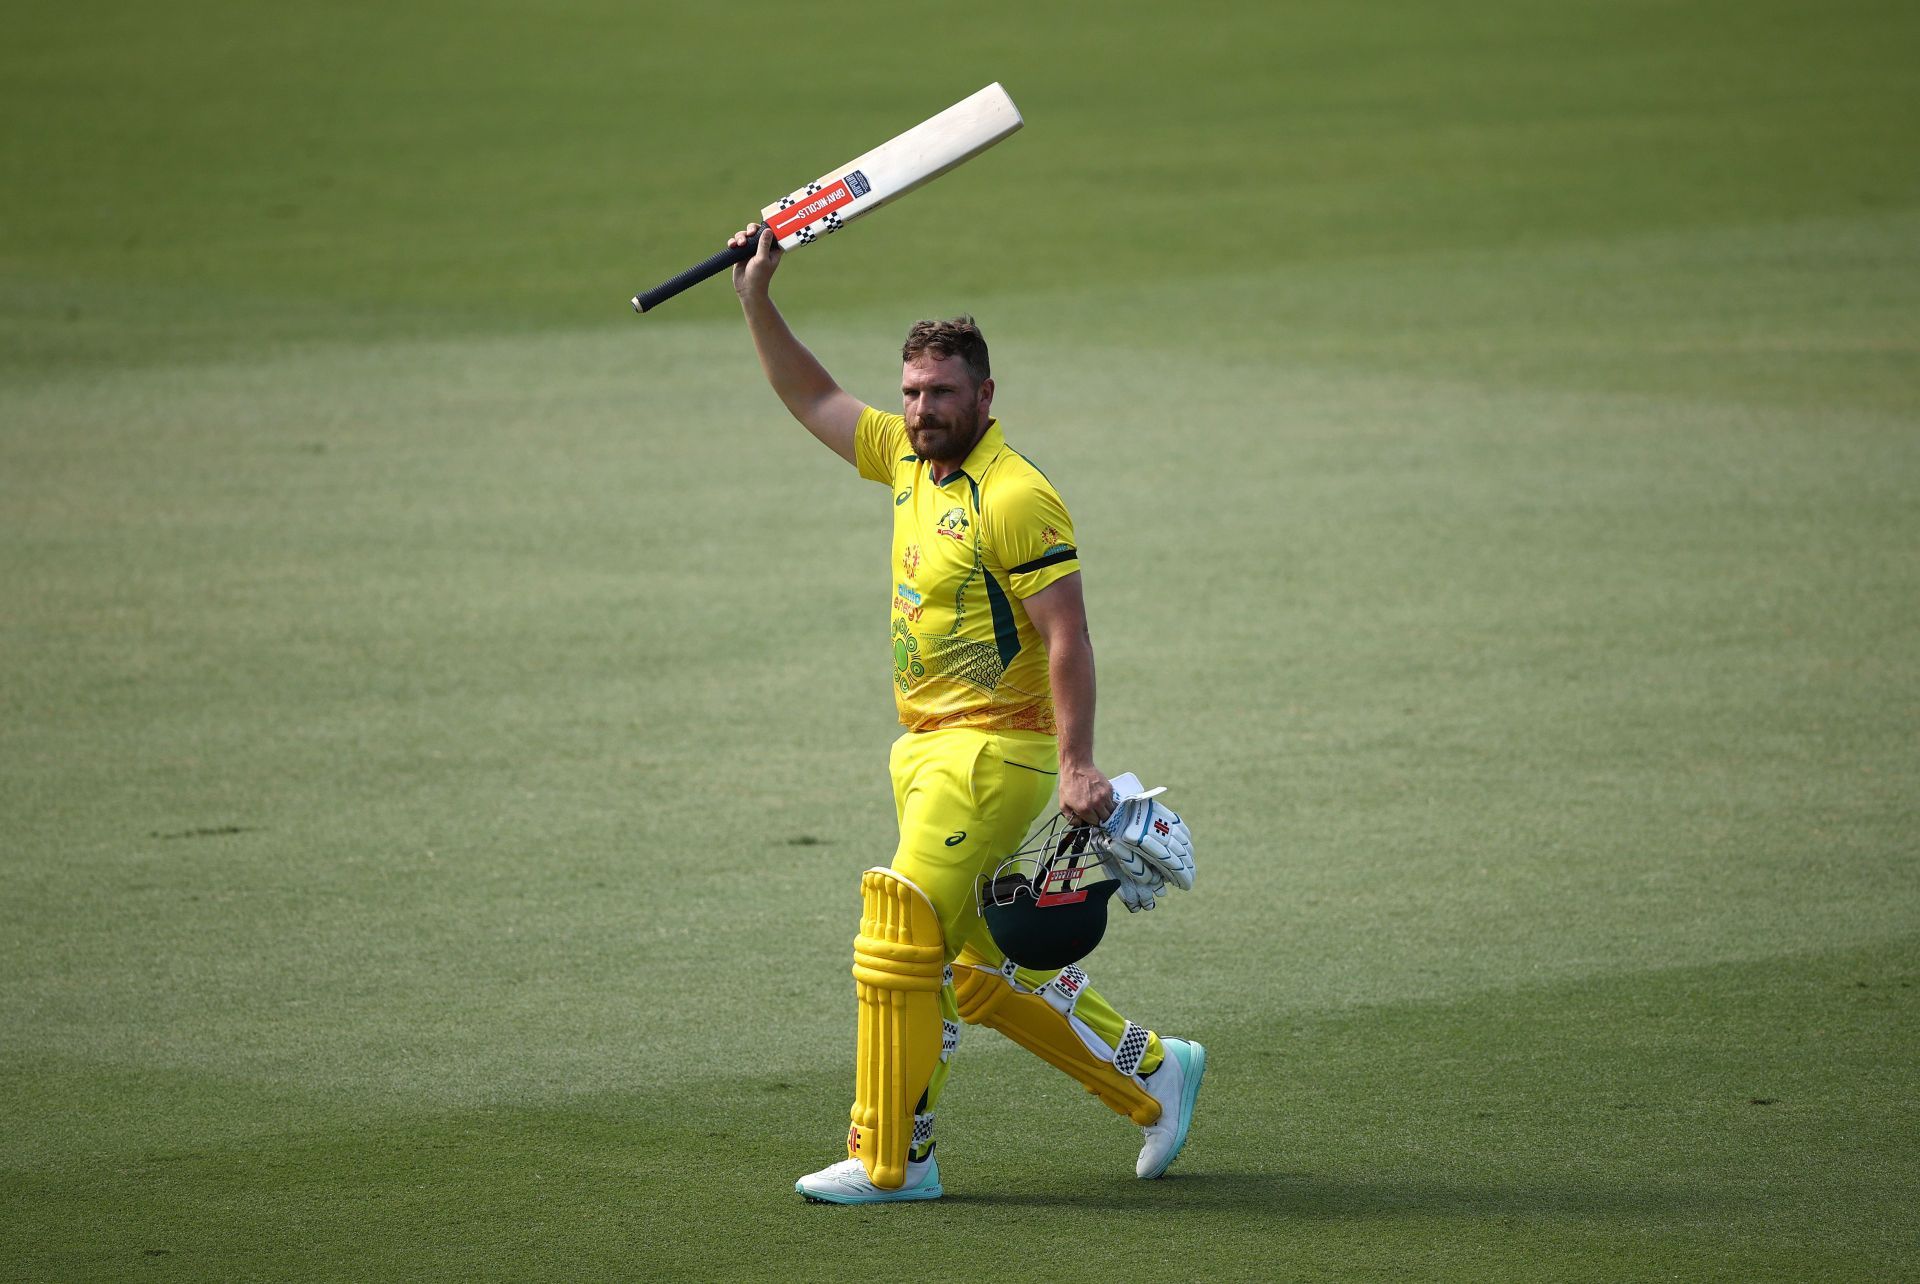 Aaron Finch walks off after his final ODI innings. (Image Credits: Getty)